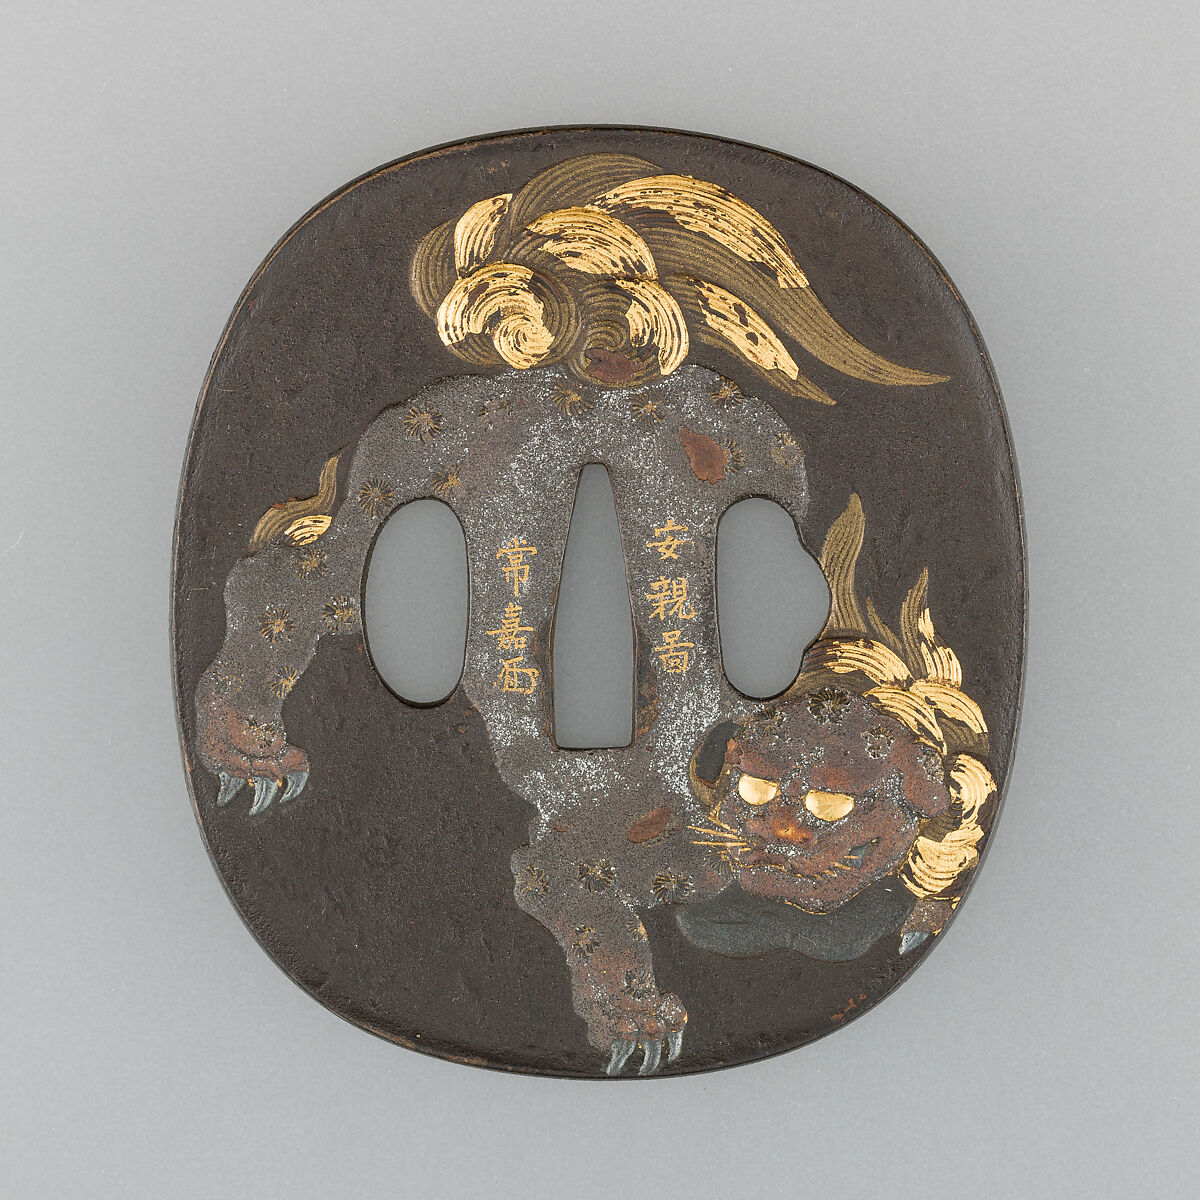 Sword Guard (Tsuba), Inscribed by Joka (Japanese, Tokyo, active late 18th–early 19th century)  , after Yasuchika, Iron, lacquer, gold, Japanese, Tokyo 